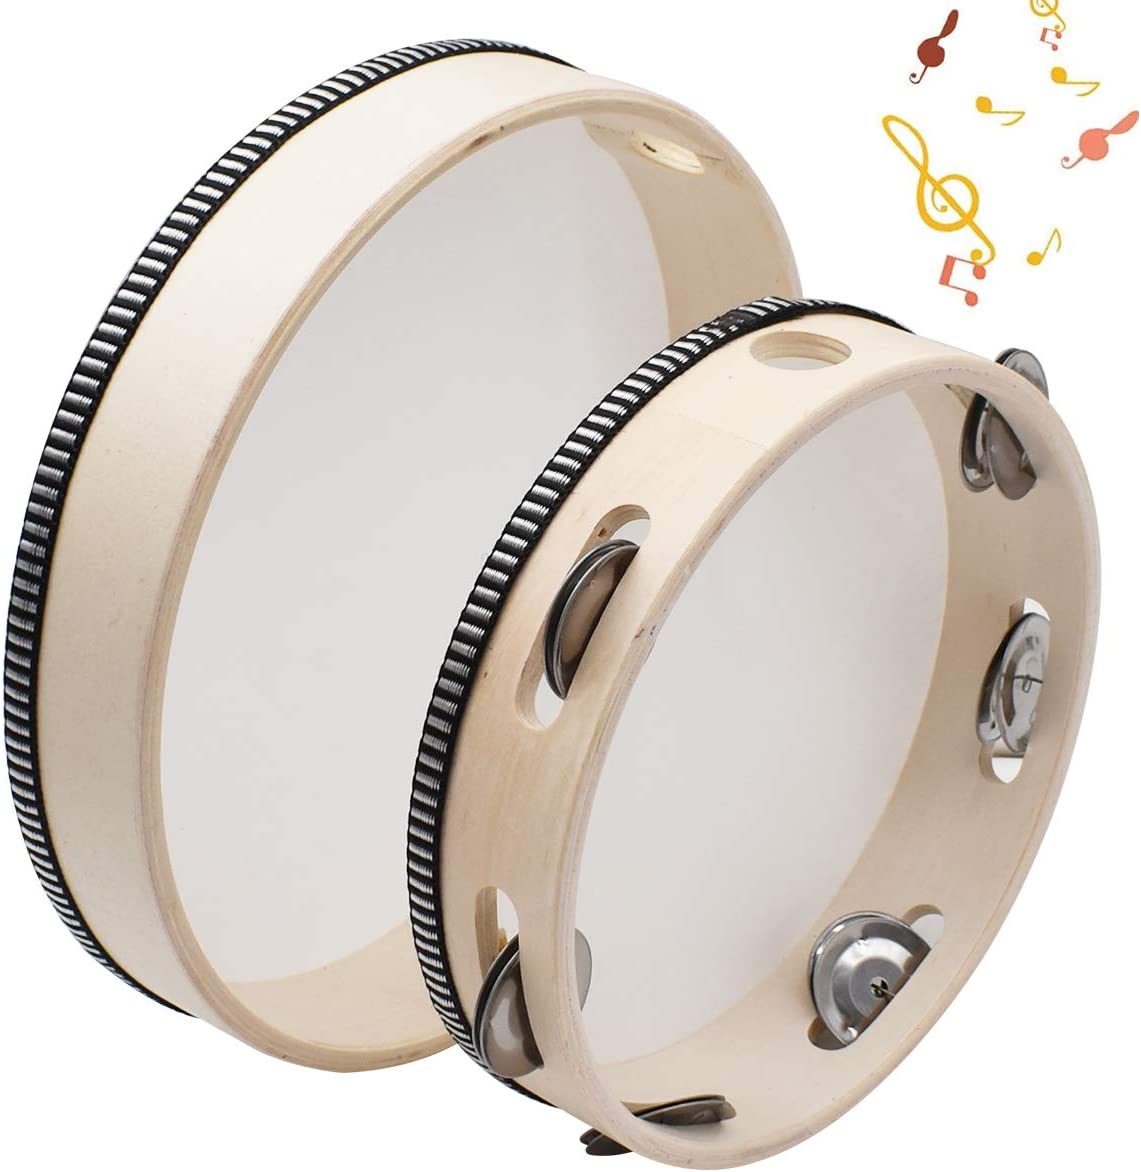 Tambourins cymbalettes: Tambourin ø 30 cm avec cymbalettes